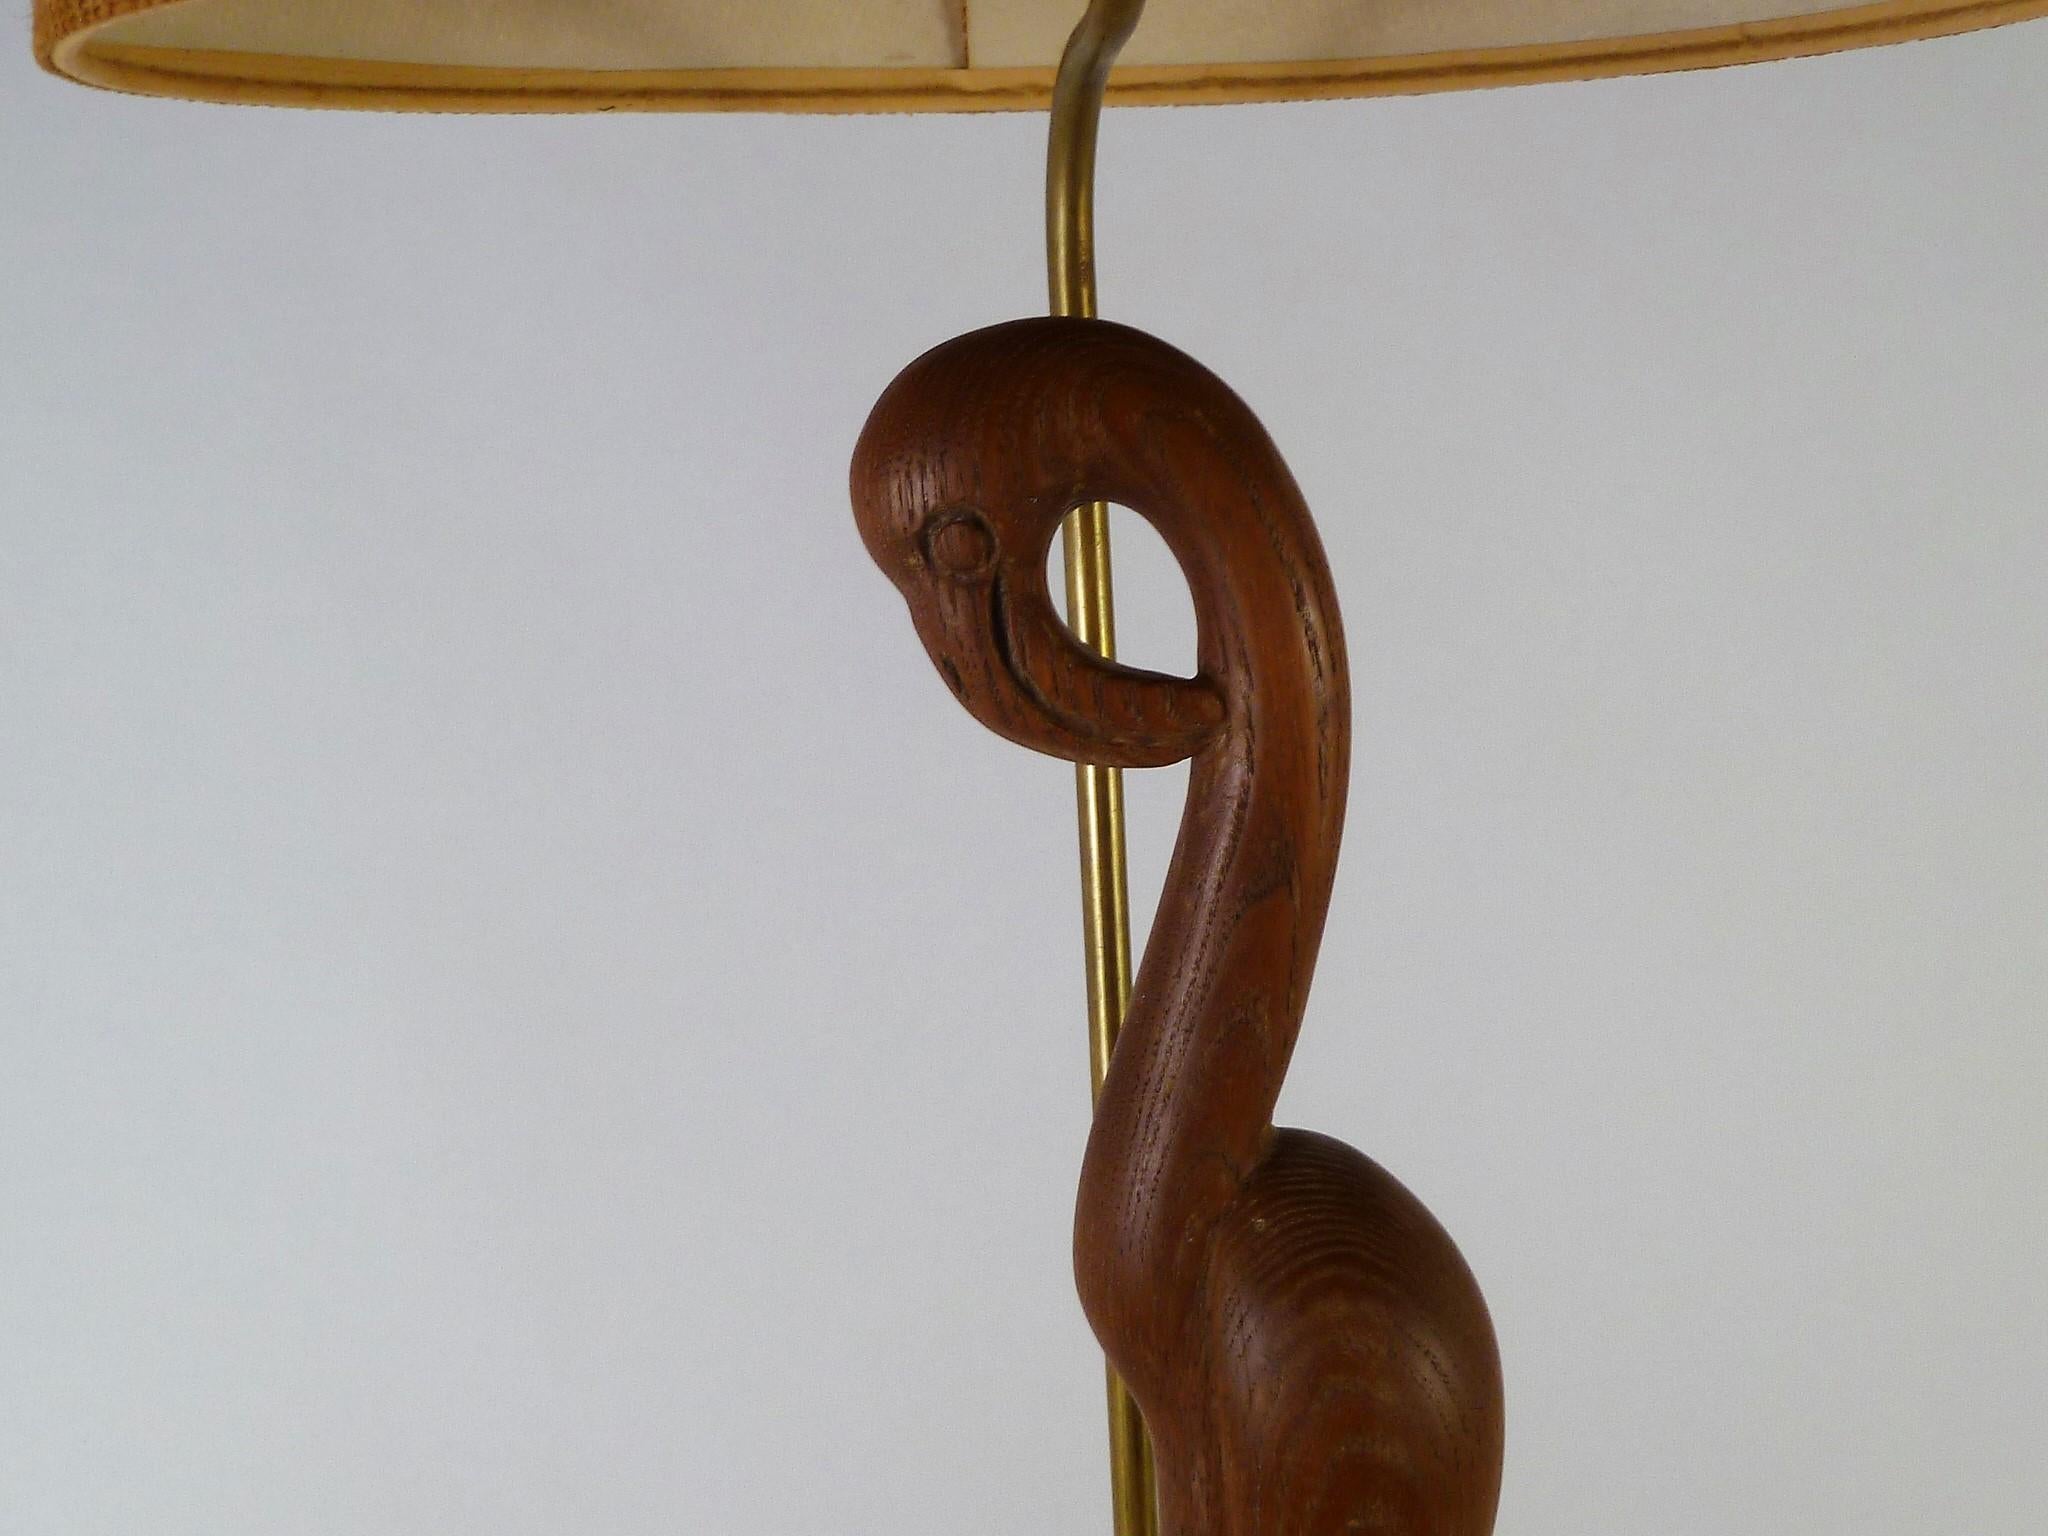 Fabulous modern carved wood Famingo table lamp. From the 1940s, we present this fun and exotic carved cerused wood Flamingo. Perfect for your getaway pad, be it anywhere, in Florida, the Caribbean, South Pacific or the Hamptons. Just add your own